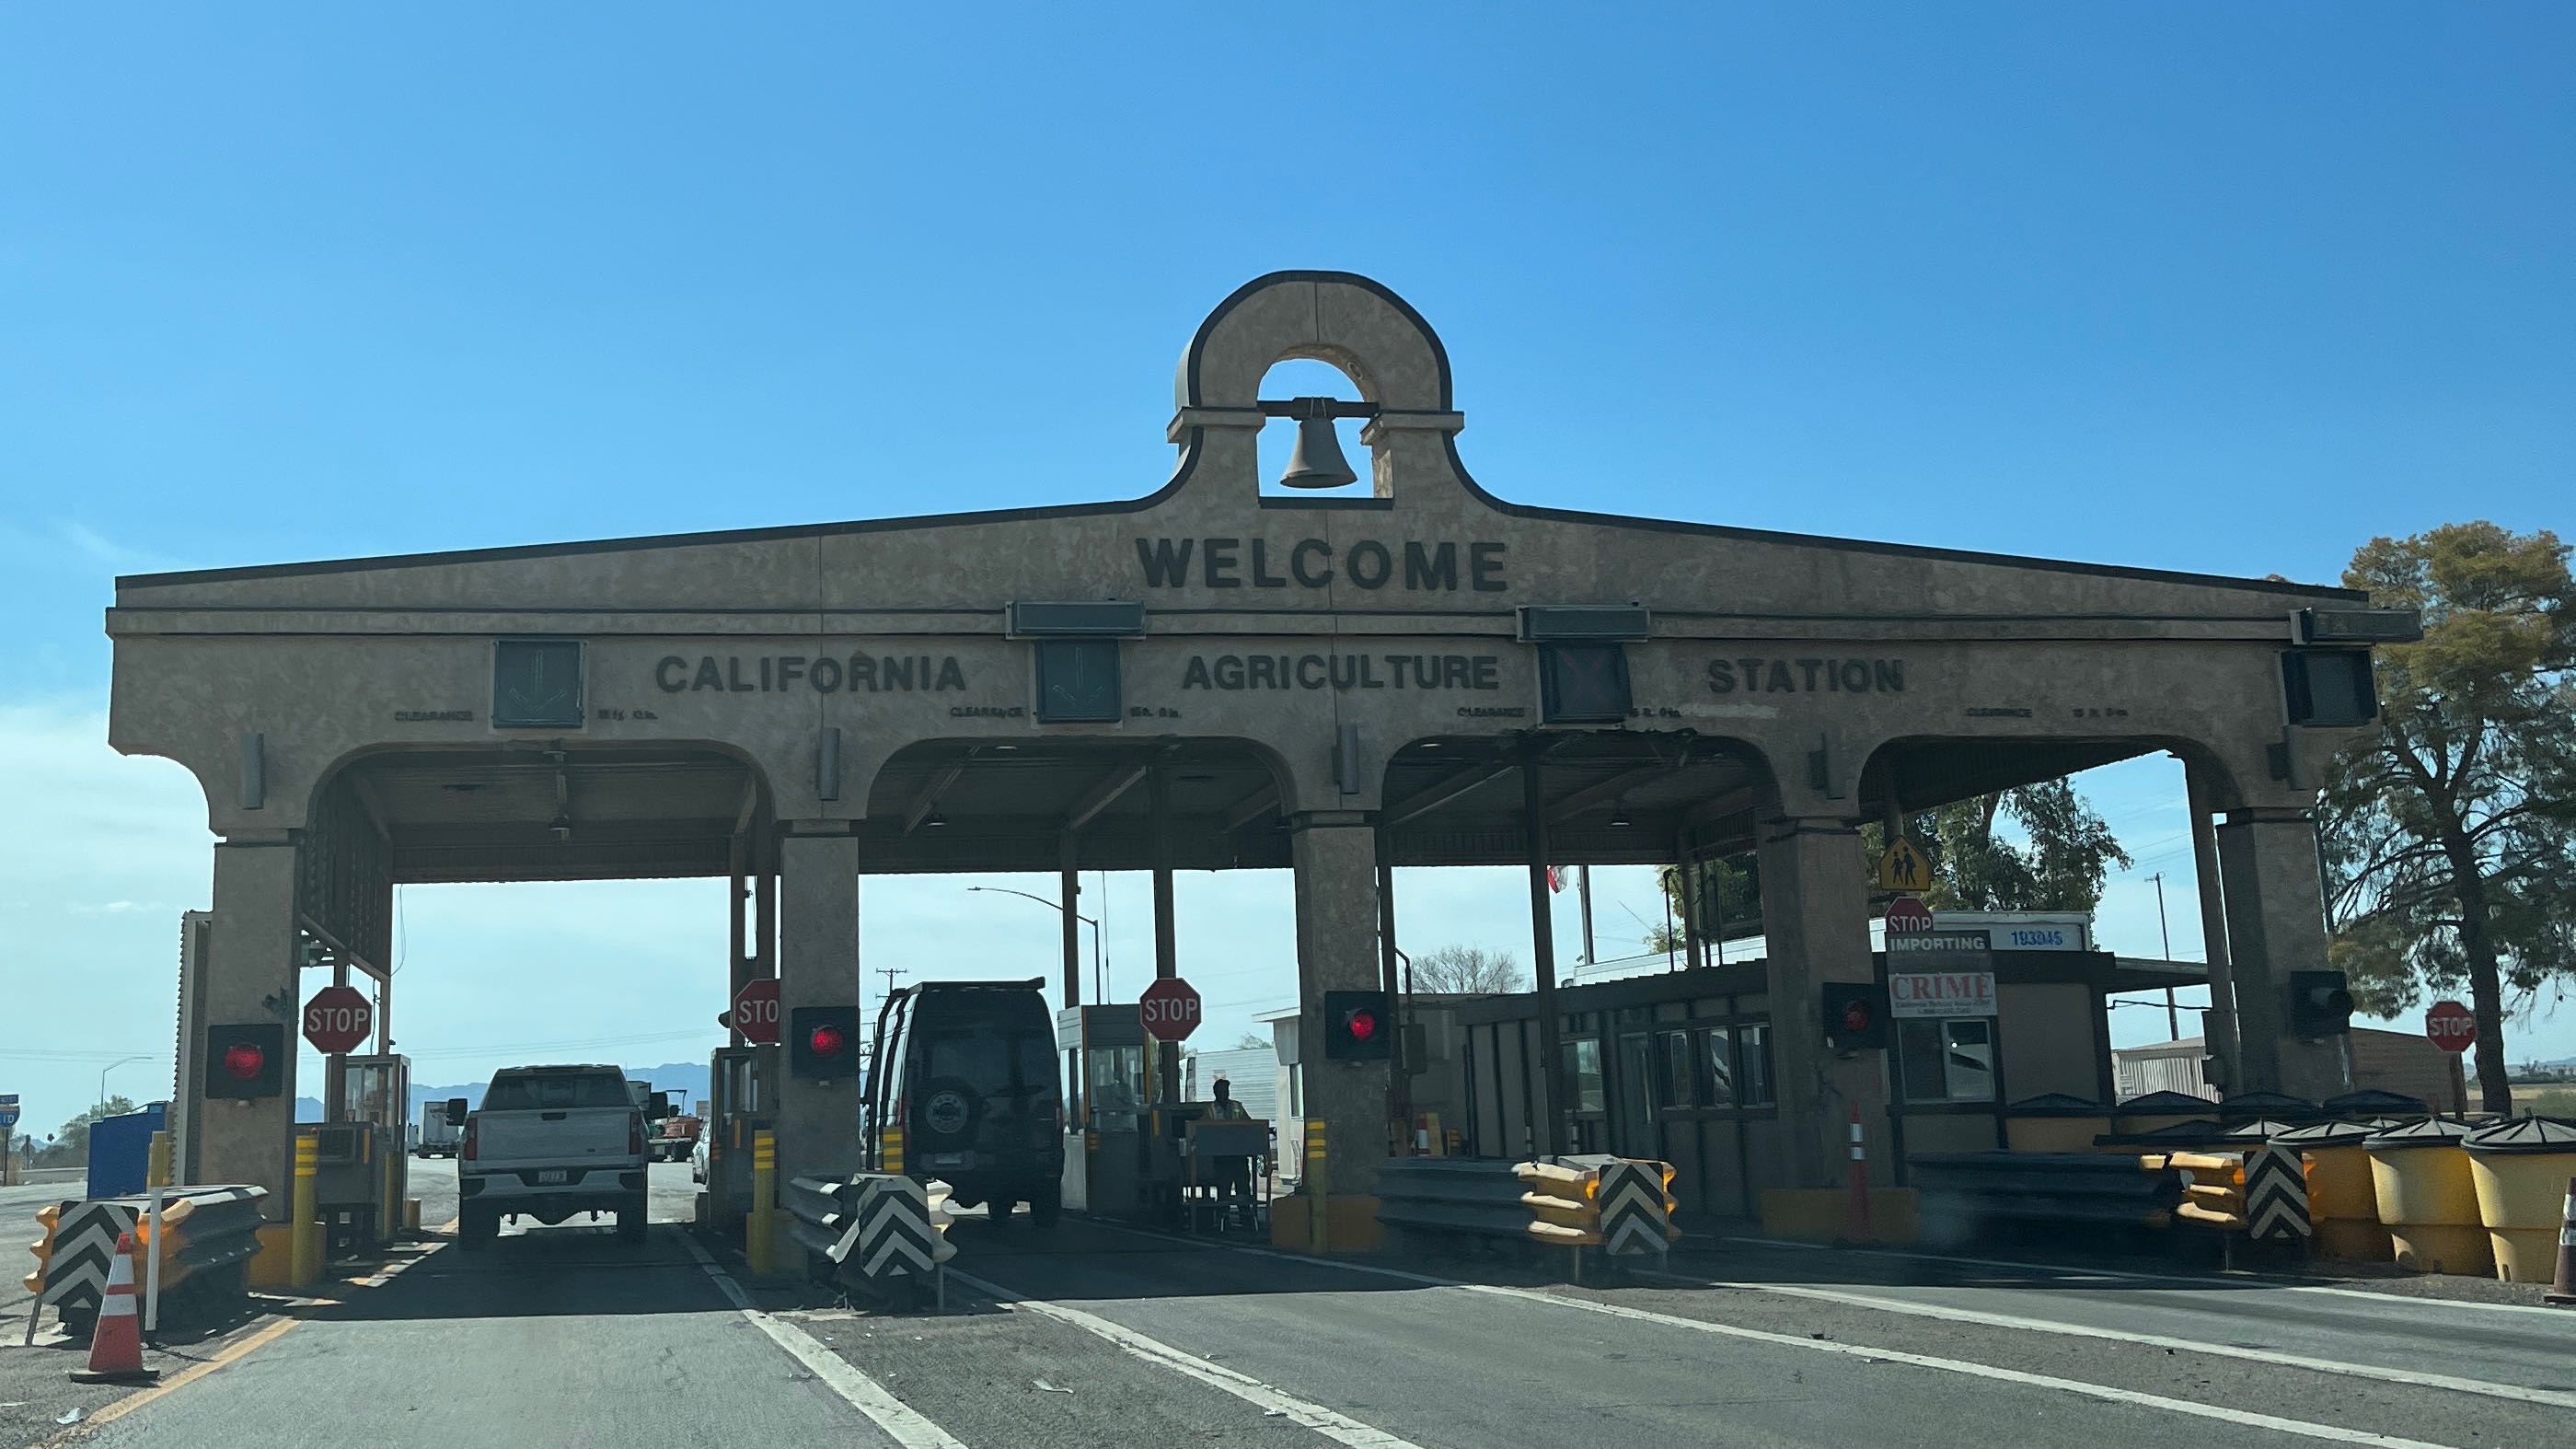 Photo of the California agricultural station on the highway